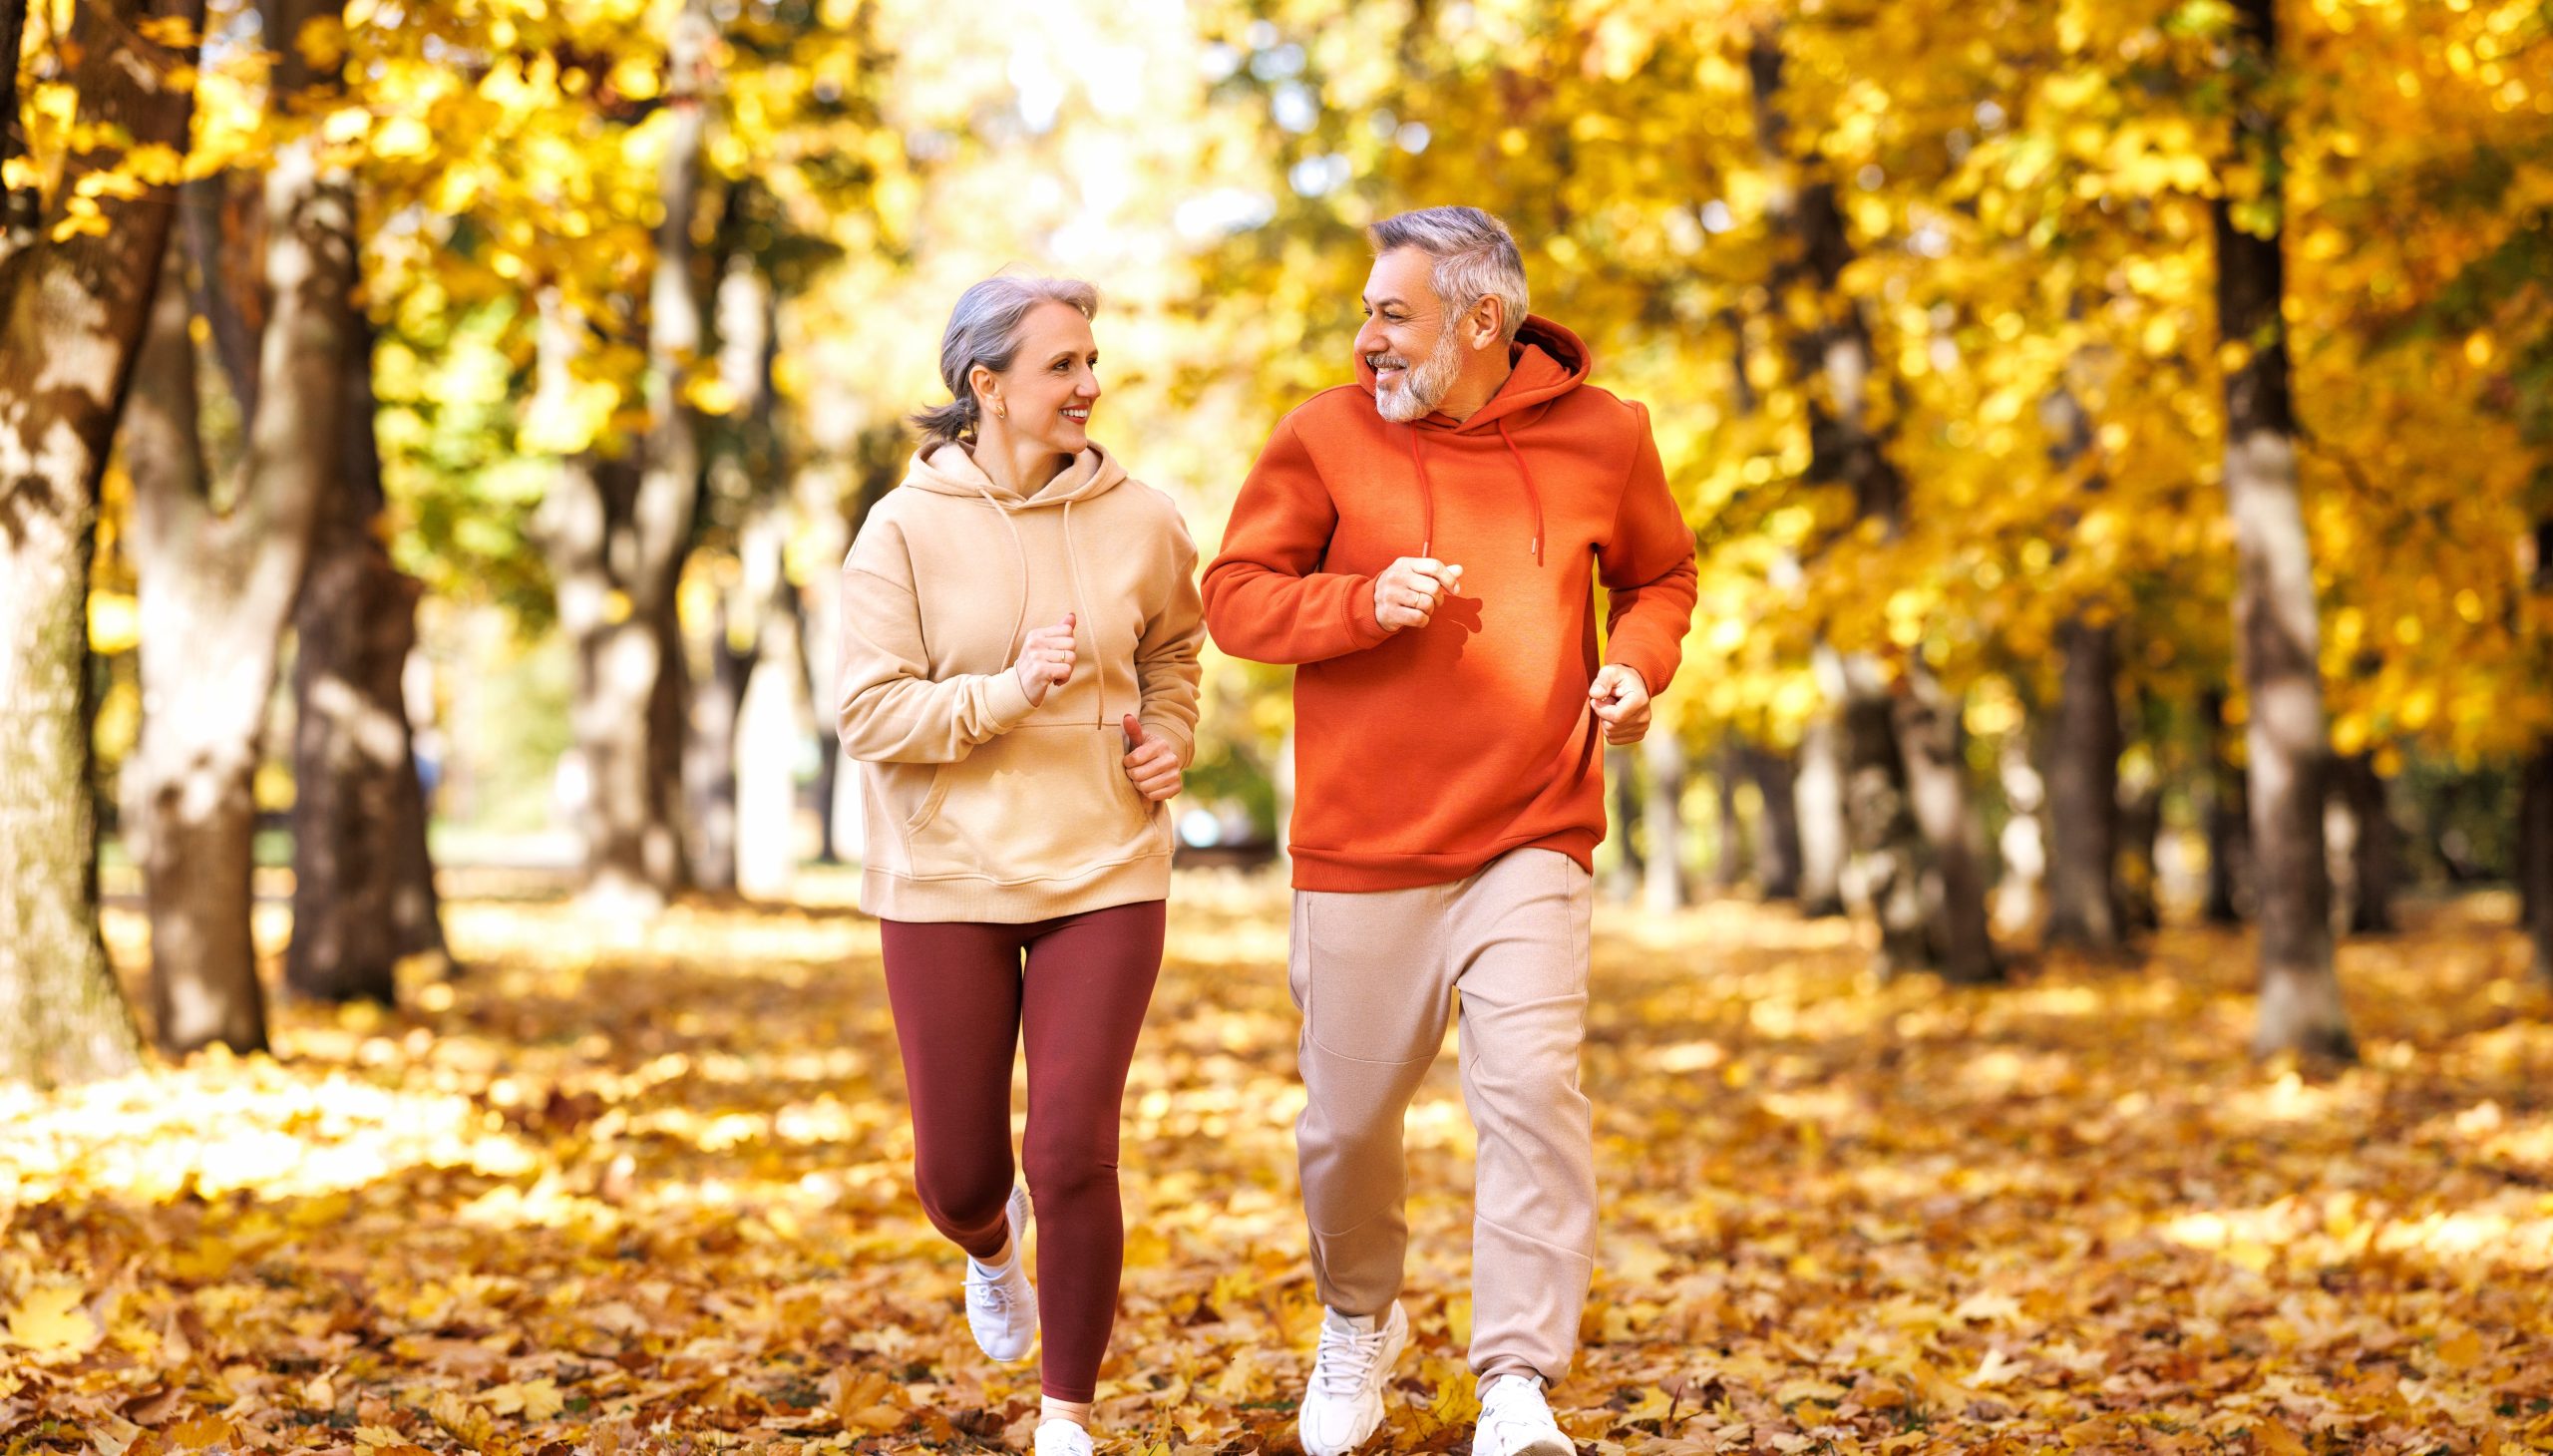 How to prevent and manage type 2 diabetes with the help of physical activity